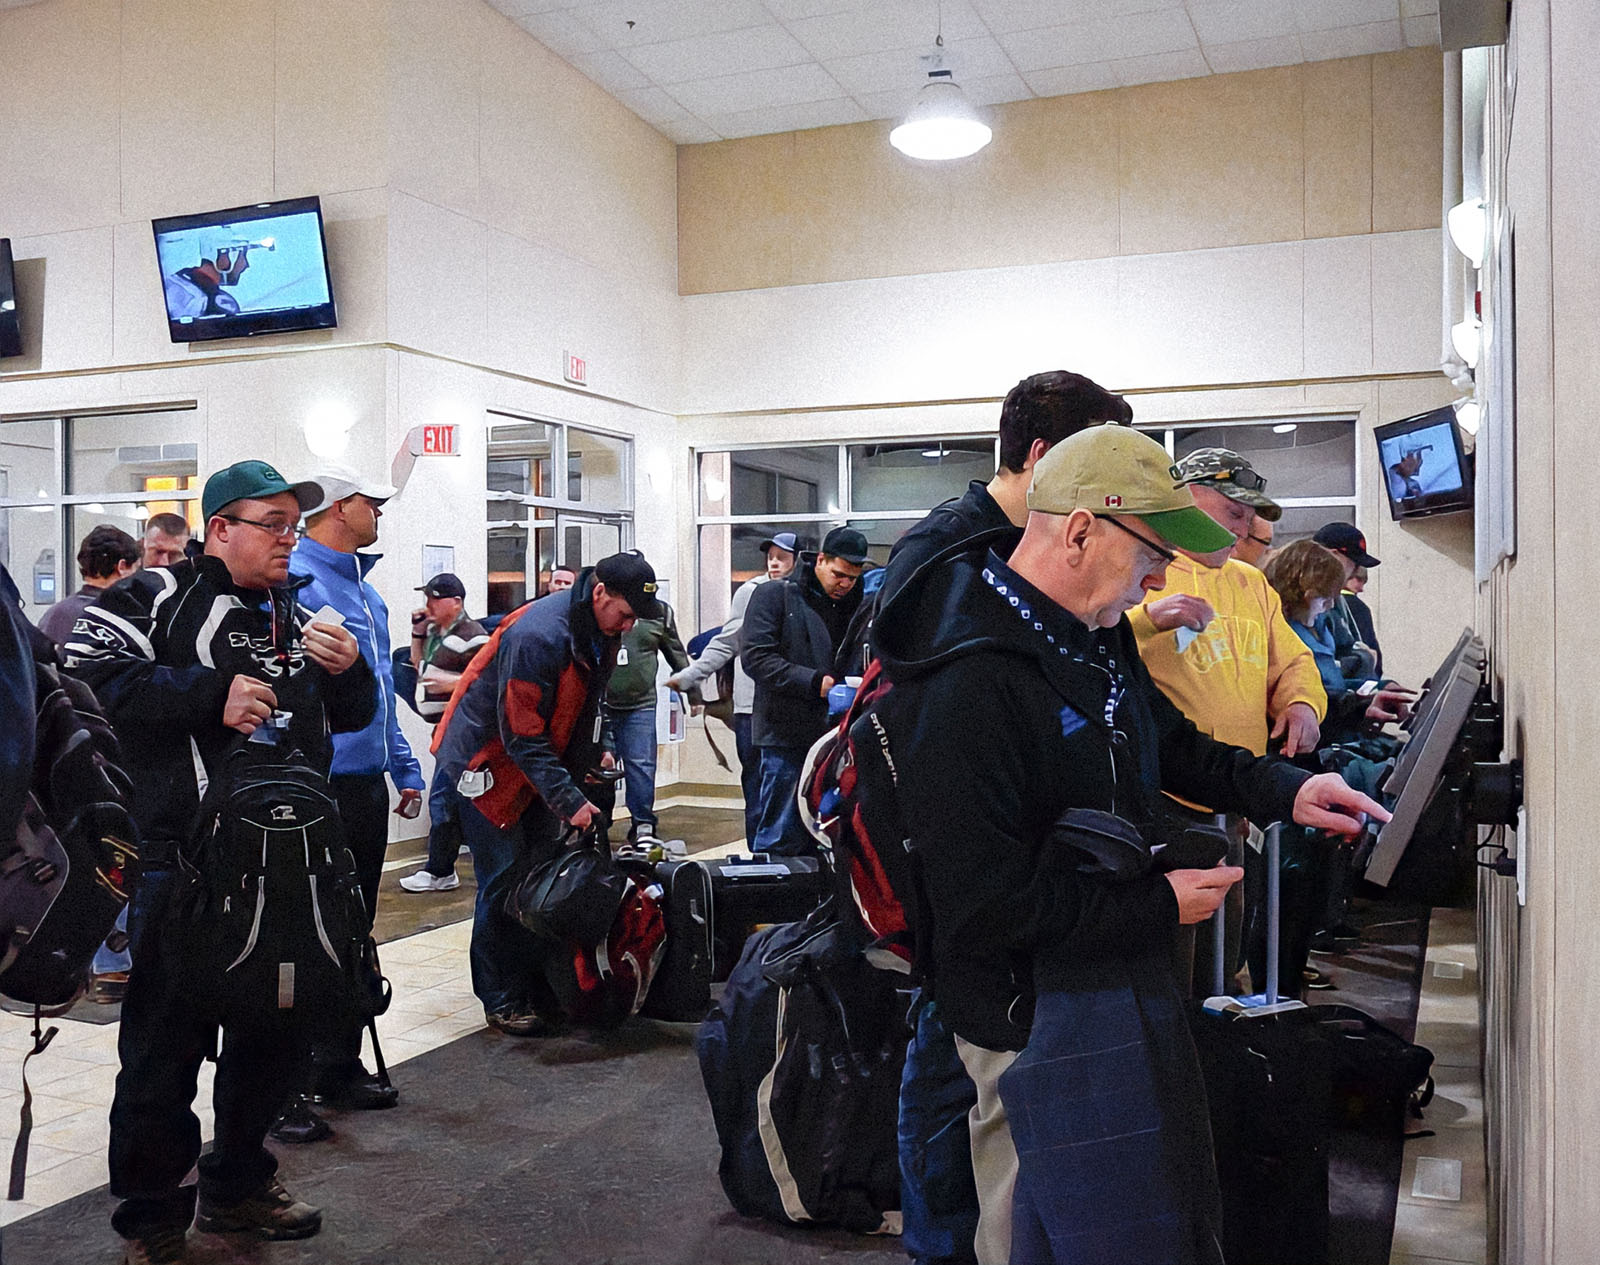 Workers use kiosks to check in at a lobby located an oil sands camp in Fort McMurray, Canada.